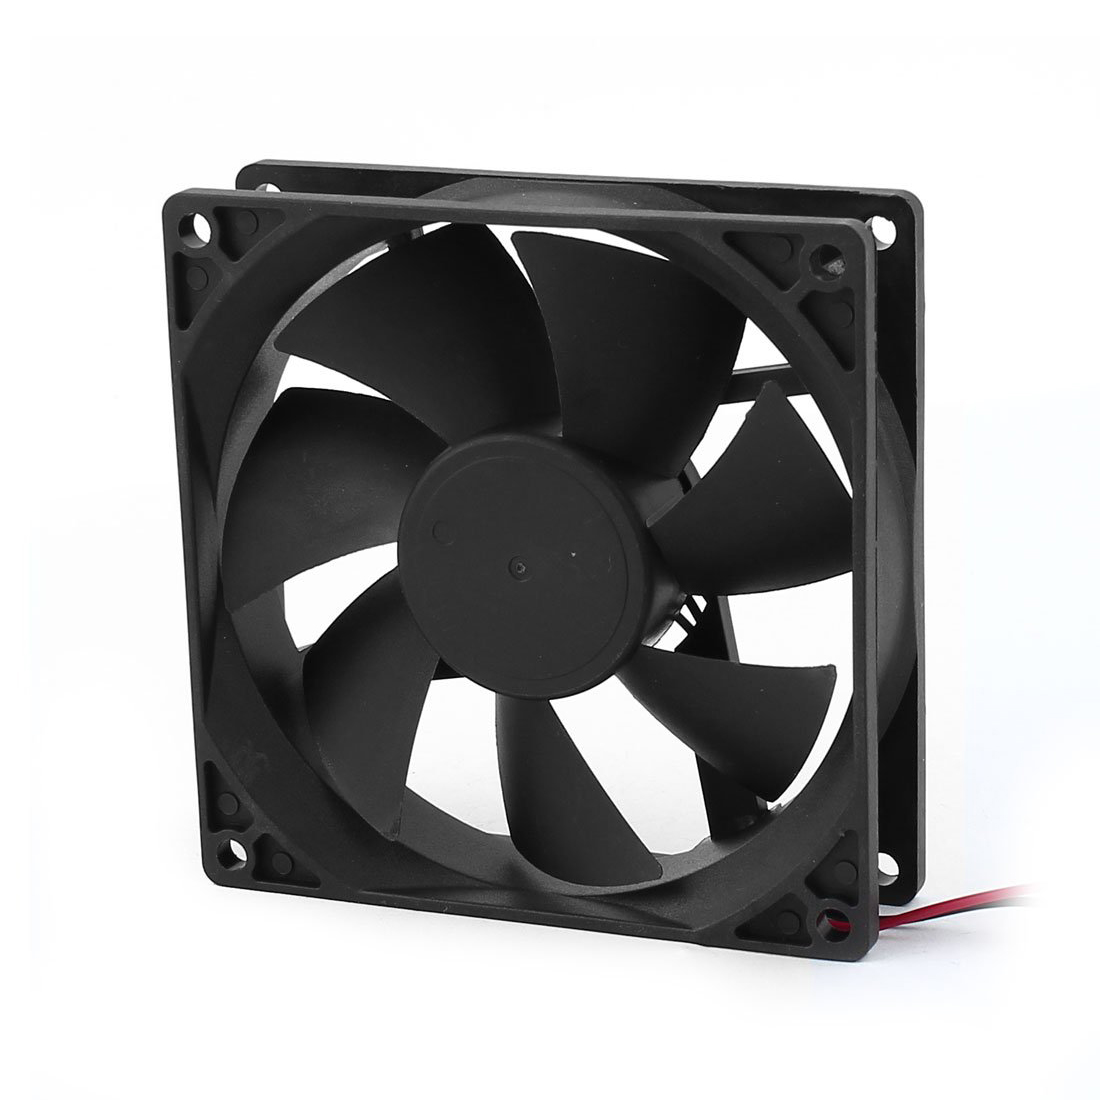 Laptops Replacements Accessories Cpu Cooling Fans Fit For MSI GE70 MS-1756 MS-1757 Notebook Computer Cpu Cooler Fan